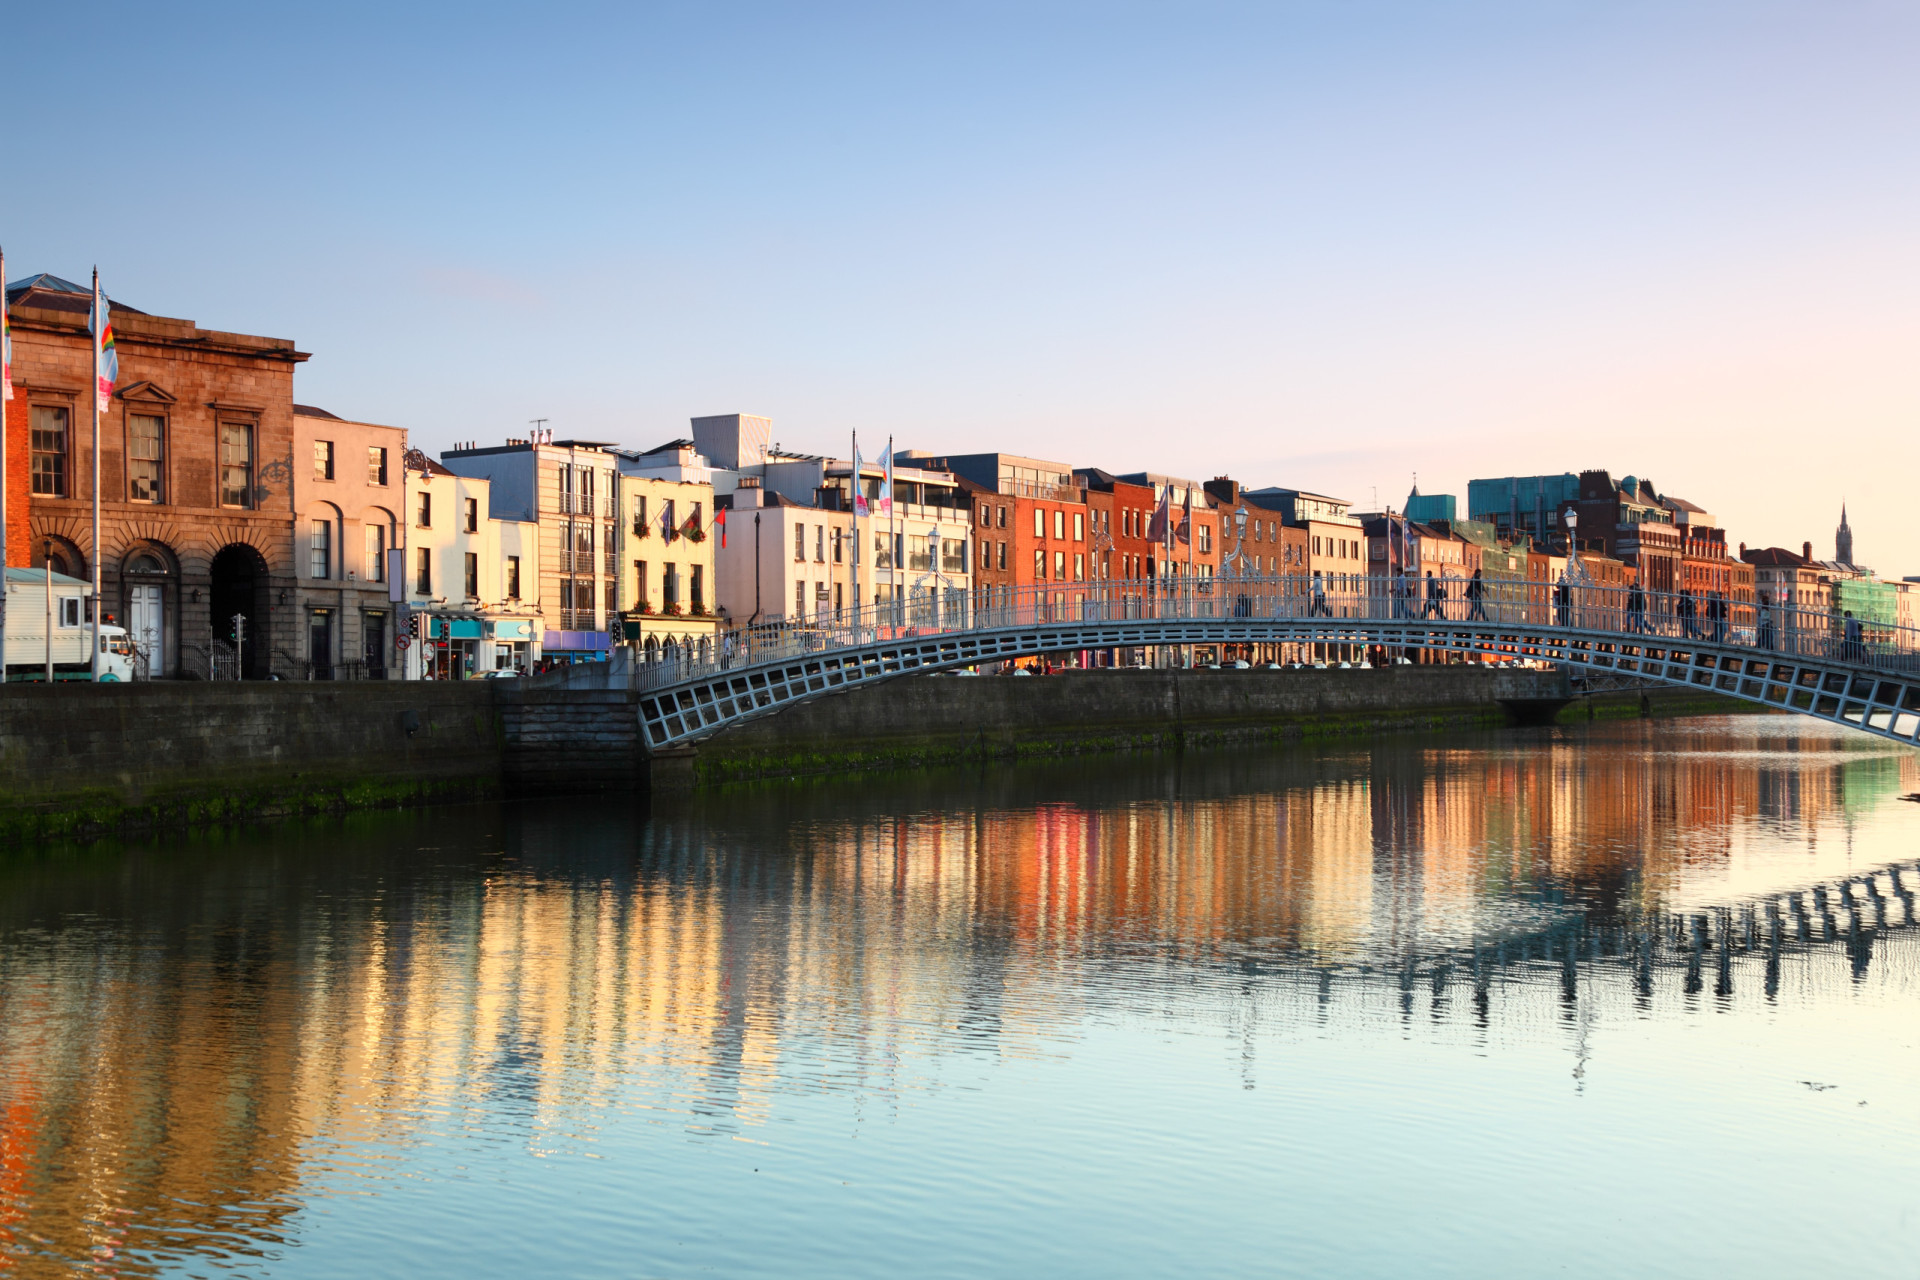 <p>Dublin, with its rent index of 61.6, is Ireland's cultural heart and economic center. Known for its vibrant history, literature, and cozy pubs, it offers a rich lifestyle that comes at a serious premium.</p><p>You may also like:<a href="https://www.starsinsider.com/n/203982?utm_source=msn.com&utm_medium=display&utm_campaign=referral_description&utm_content=651794en-in"> Celebrity kids who became more famous than their parents</a></p>